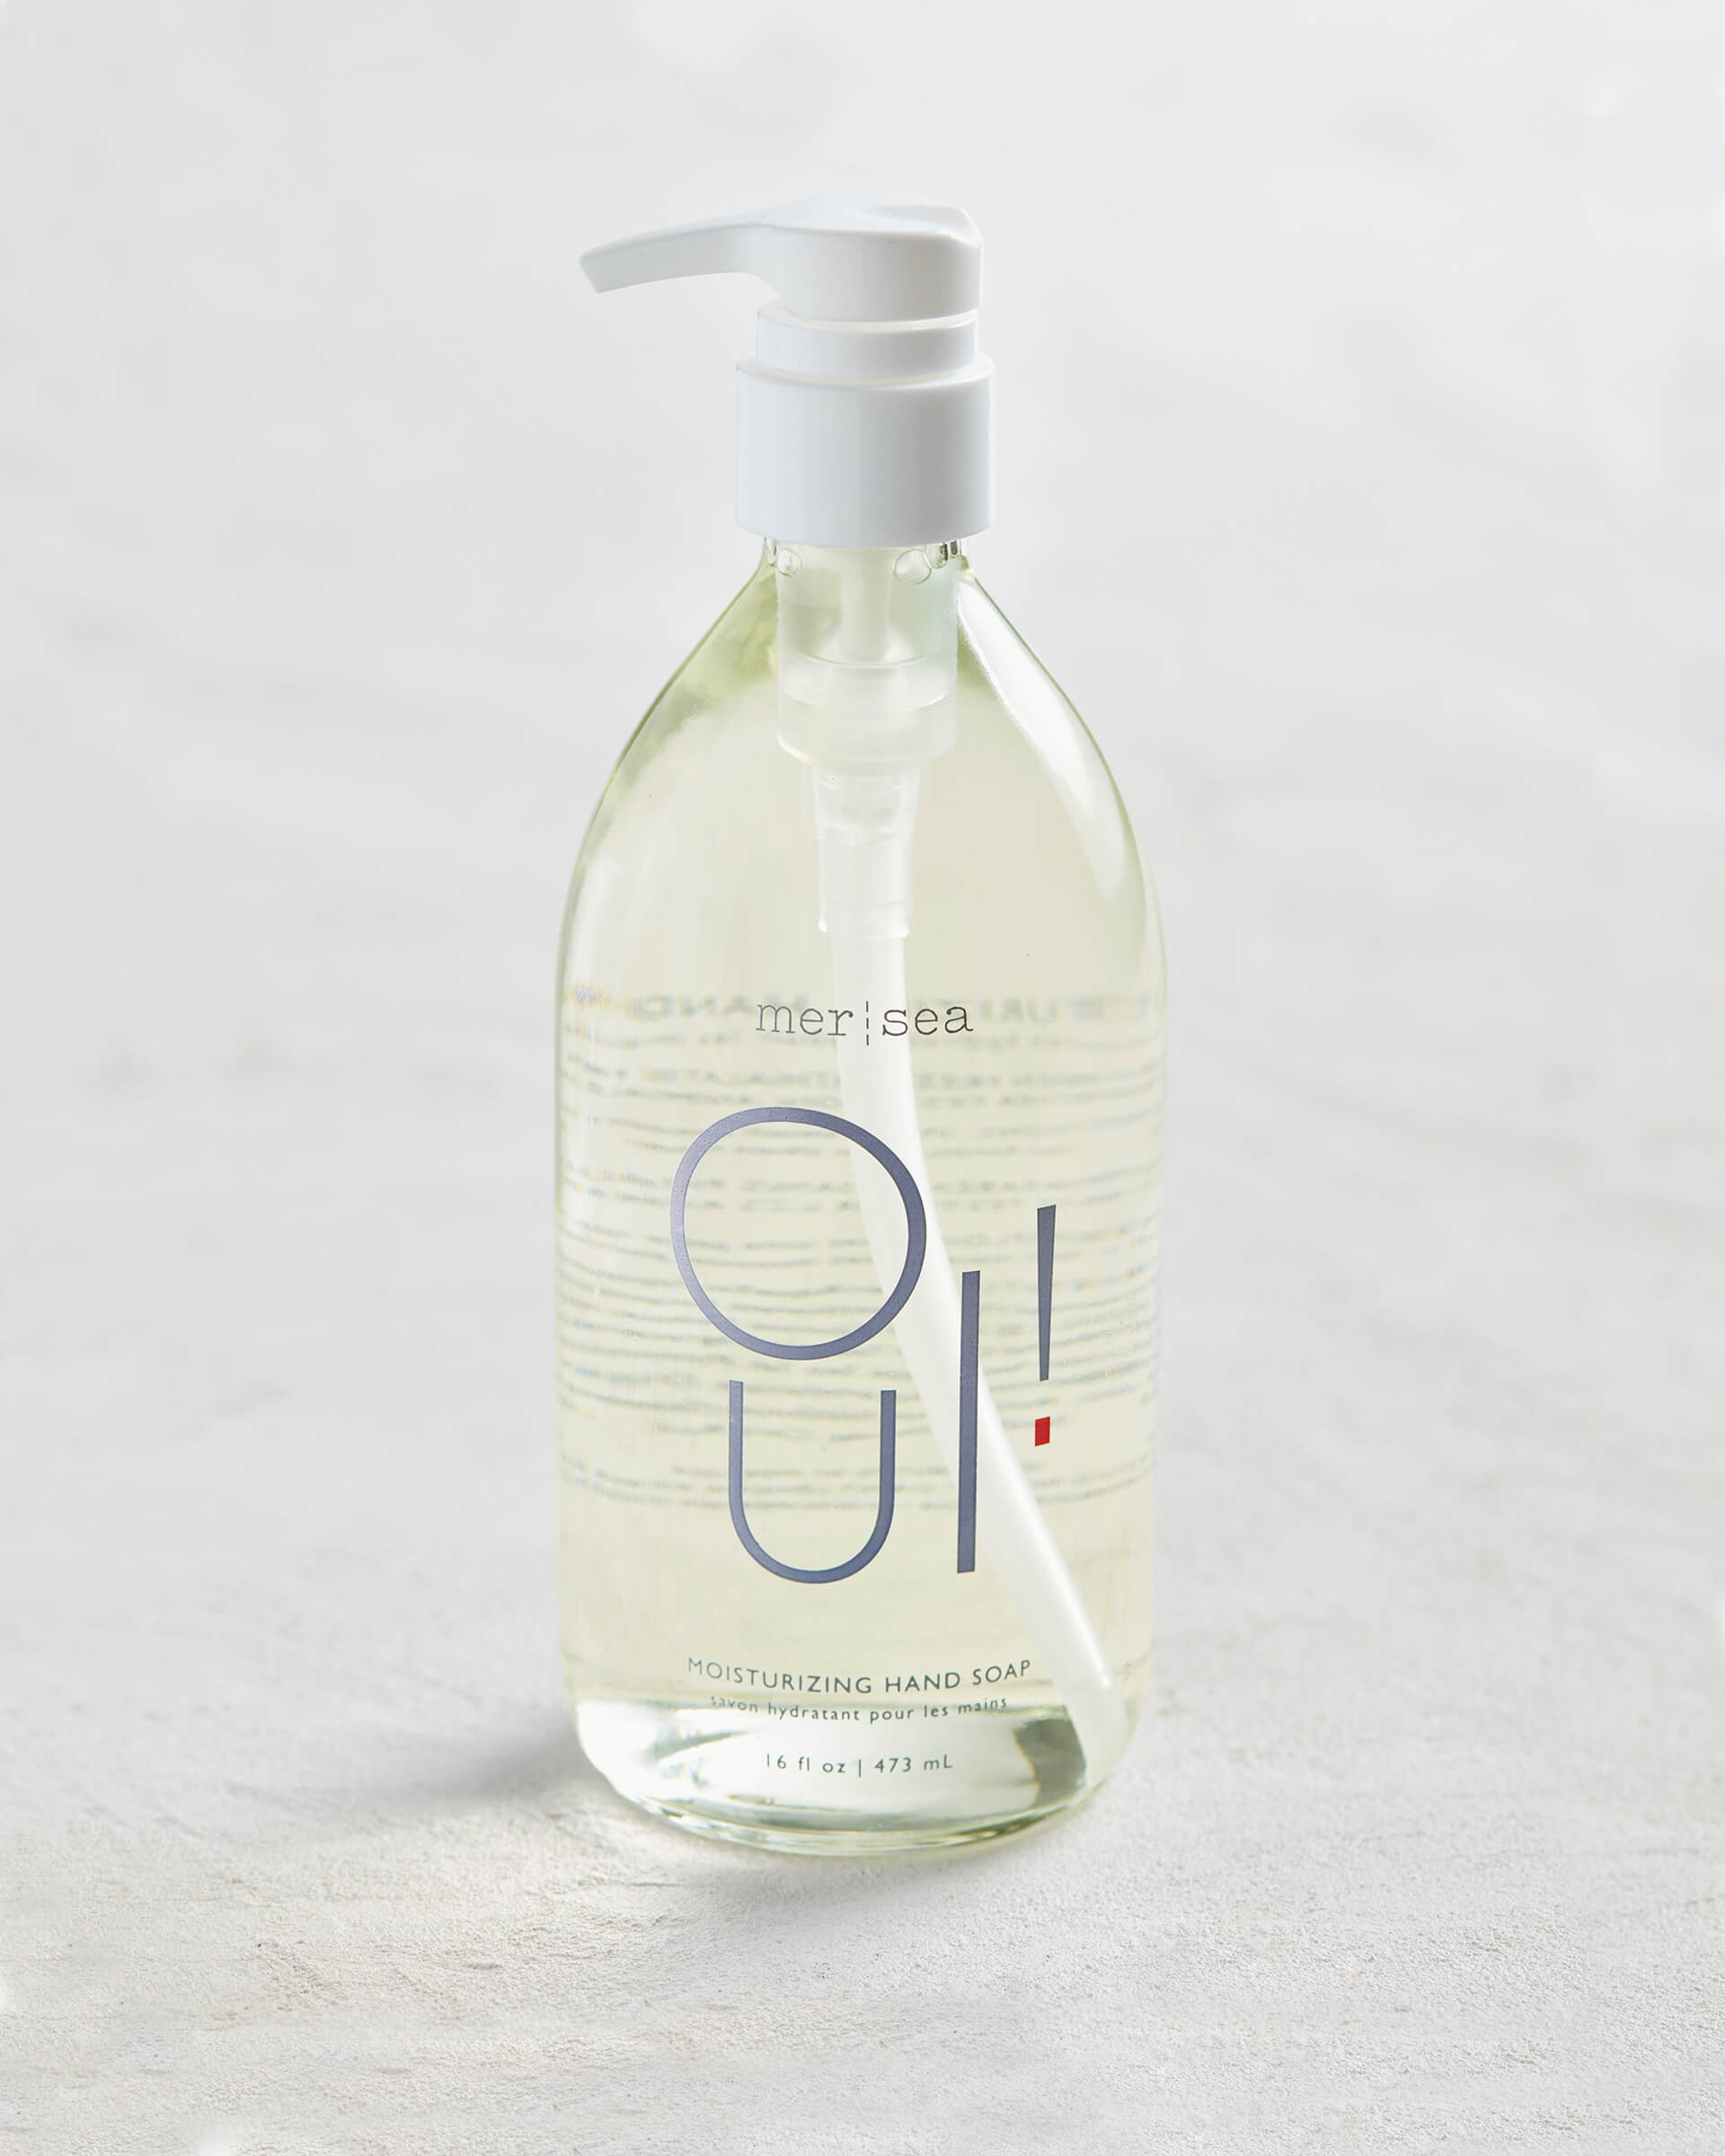 large OUI! liquid hand soap sitting on a white background